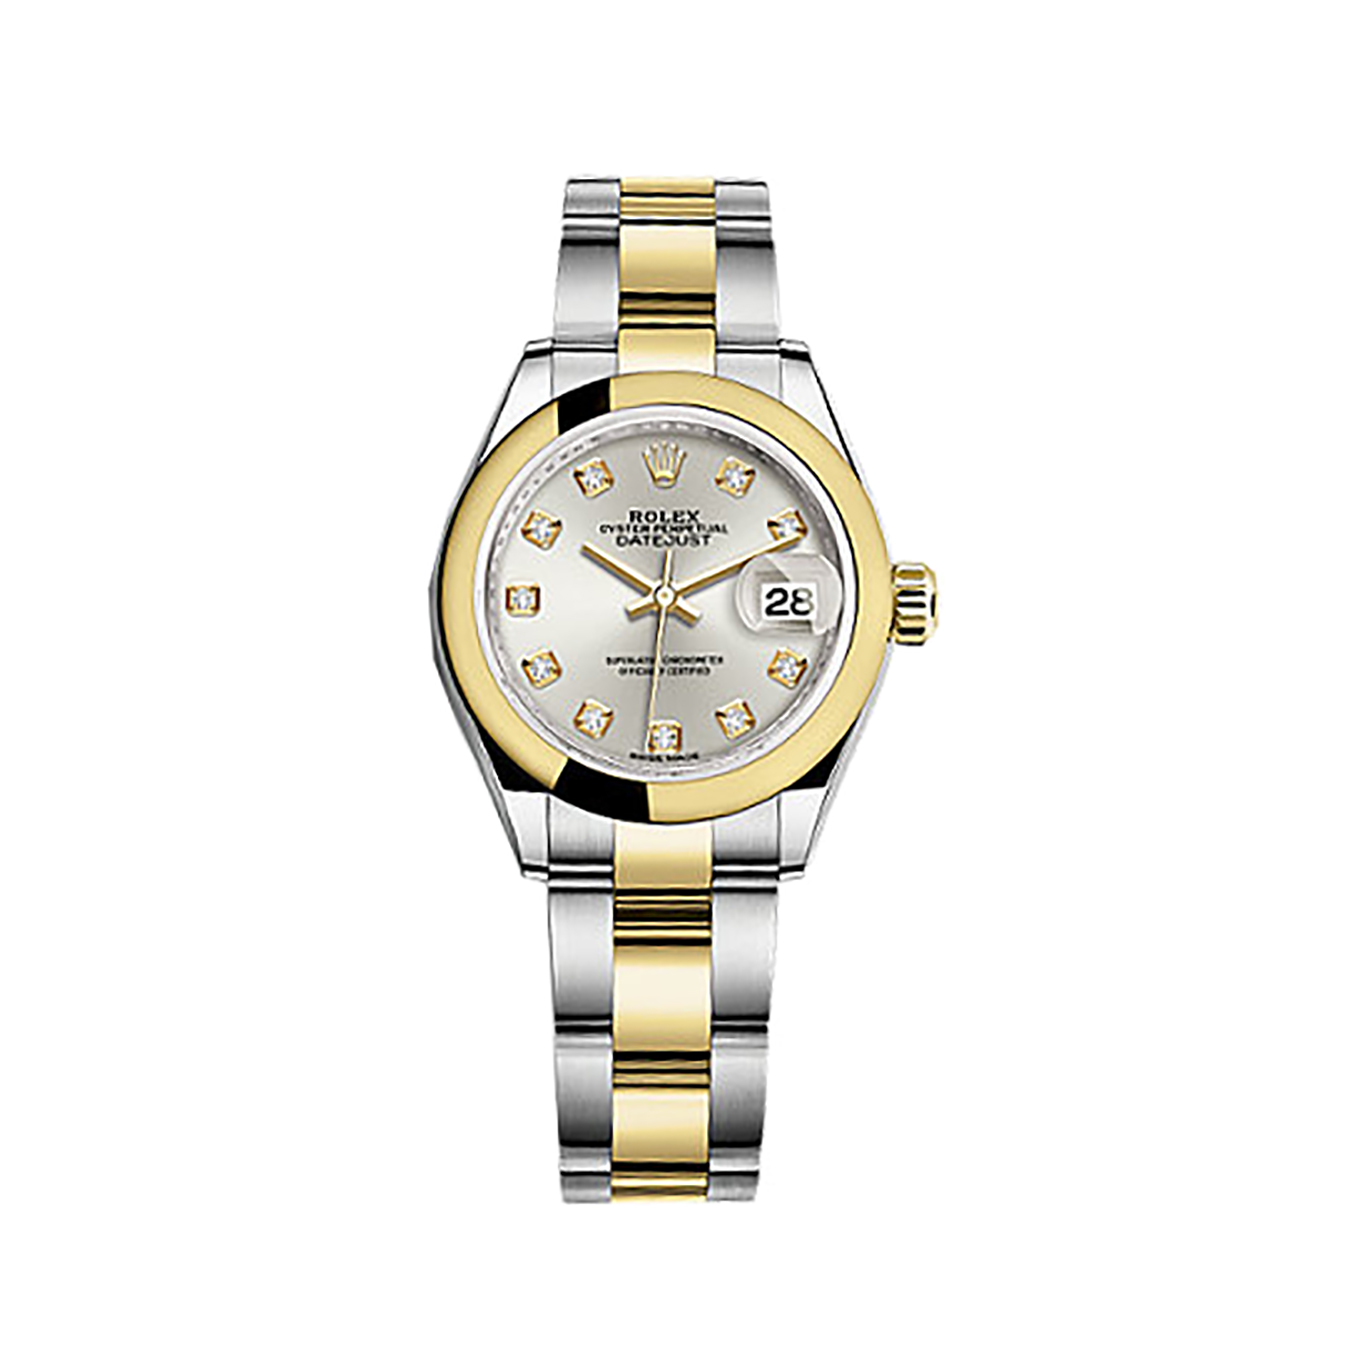 Lady-Datejust 28 279163 Gold & Stainless Steel Watch (Silver Set with Diamonds)